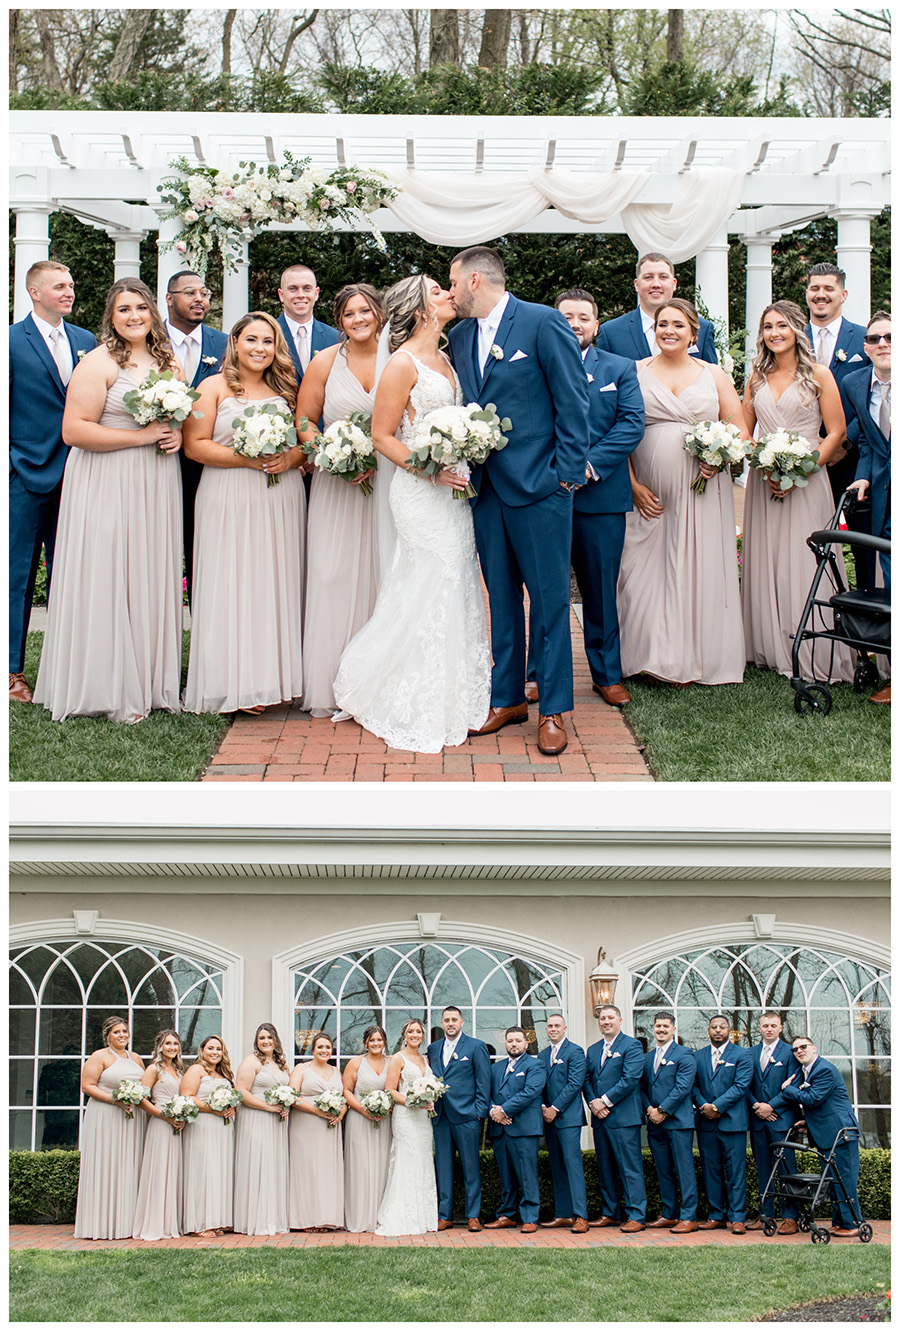 bridal party with navy tuxes and beige, neutral colored bridesmaid dresses and white bouquets